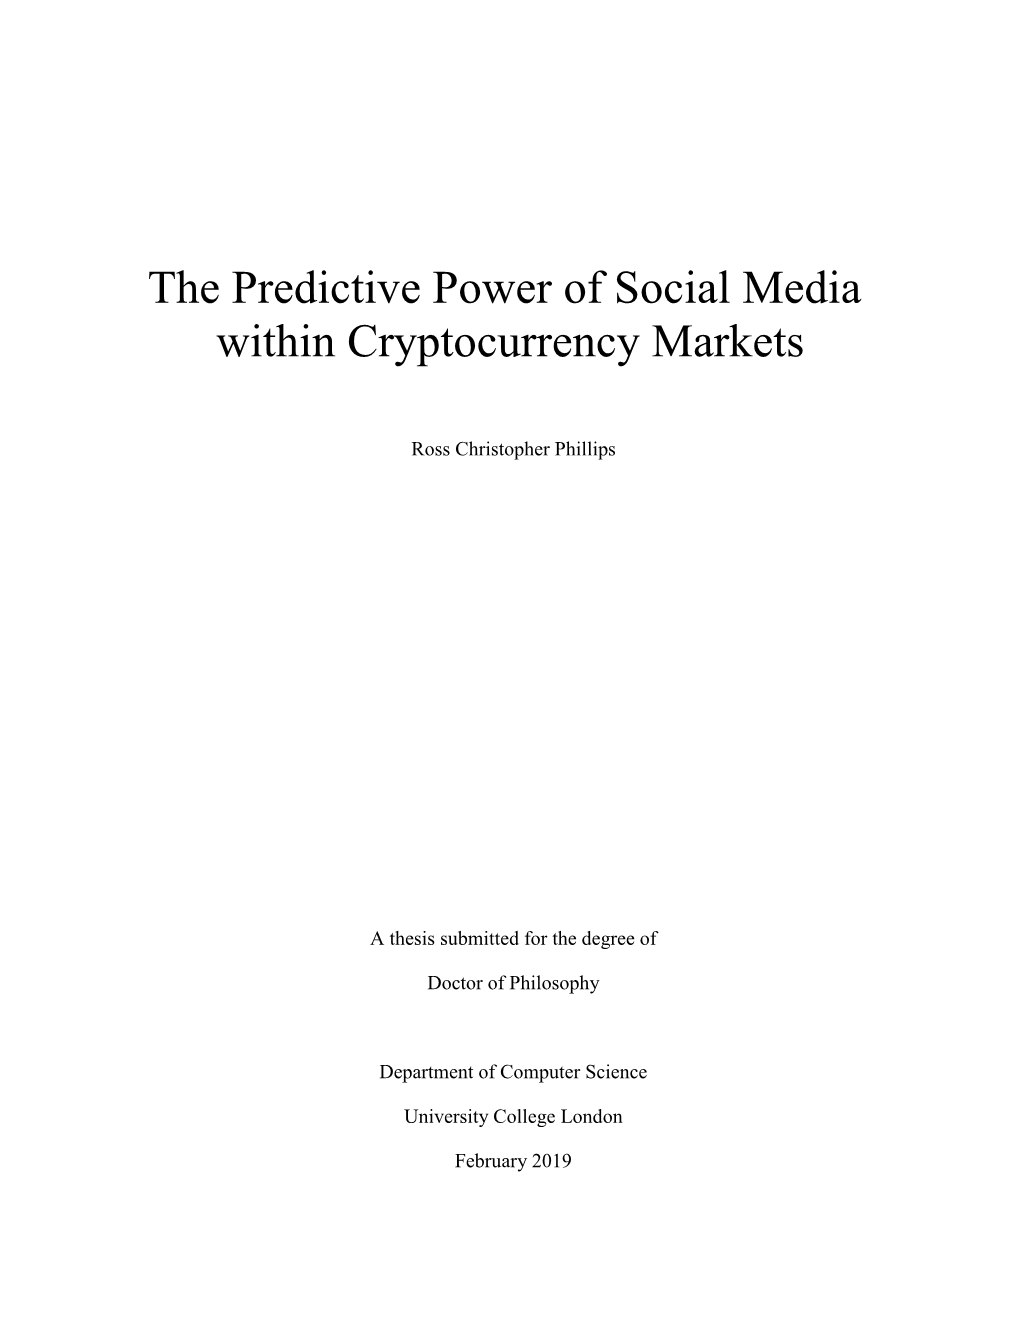 1 the Predictive Power of Social Media Within Cryptocurrency Markets